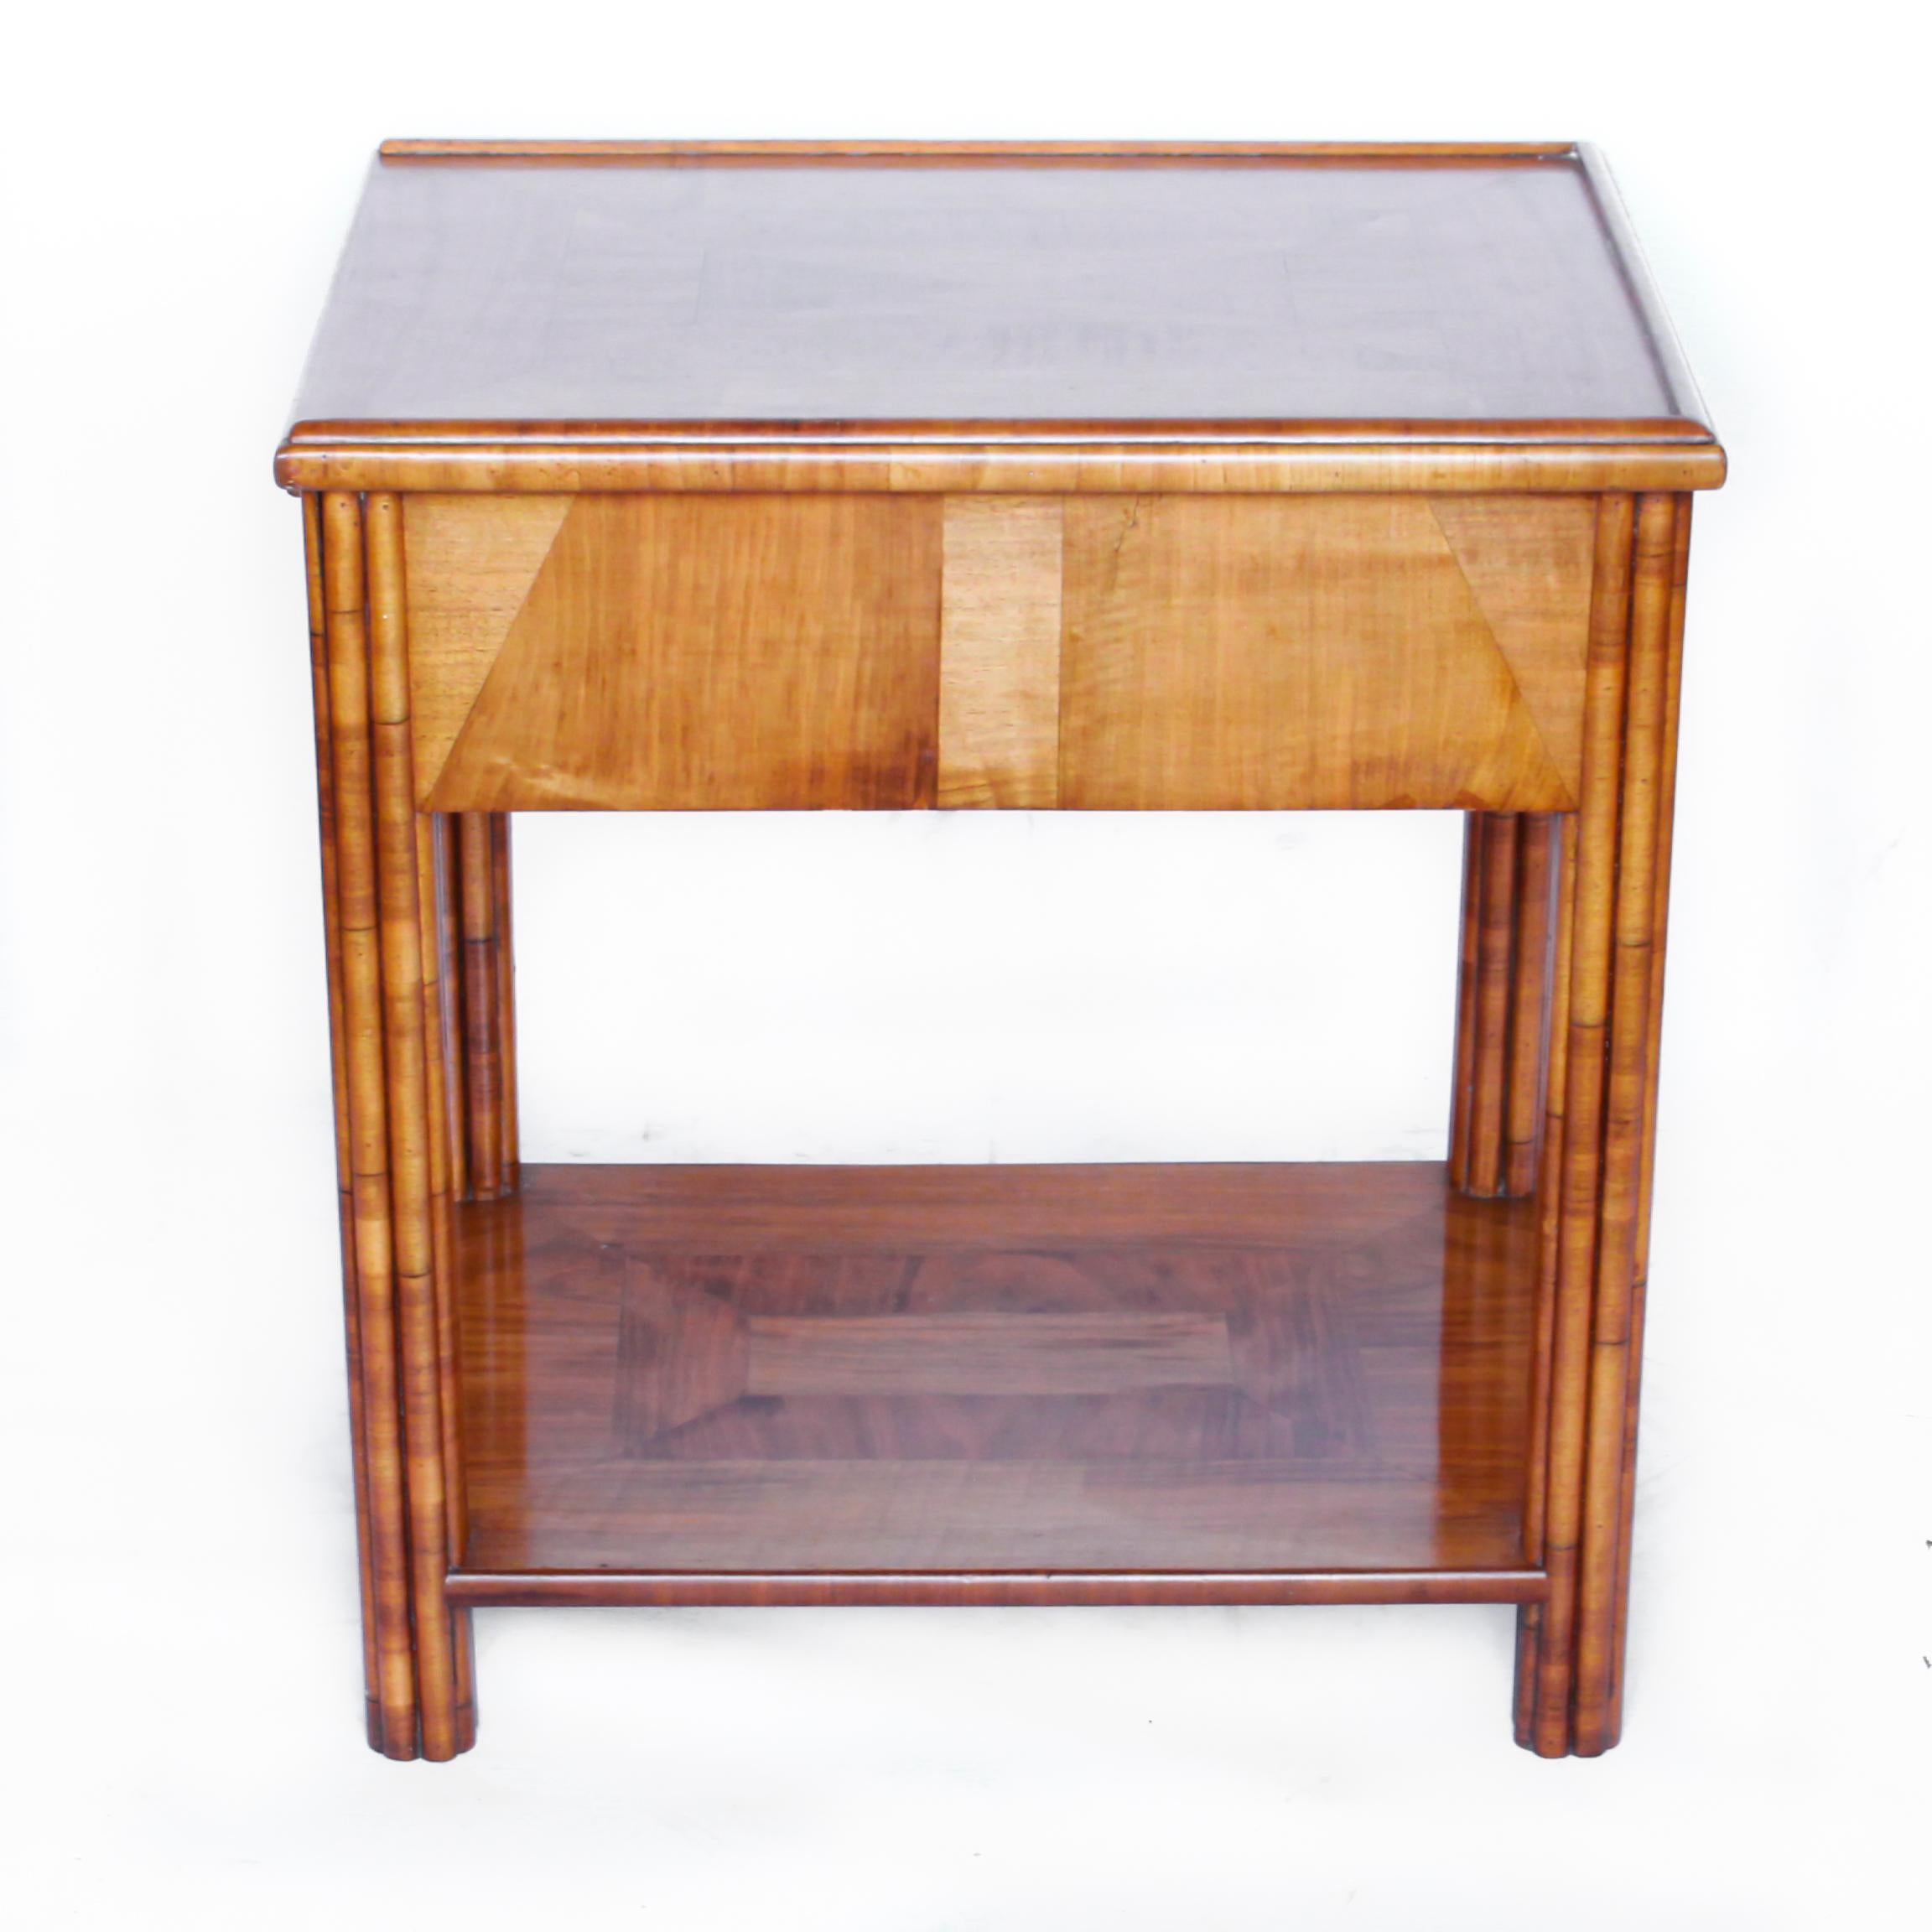 Art Deco Occasional Table Walnut with Sliding Tray and Integral Drawer 1930's 1